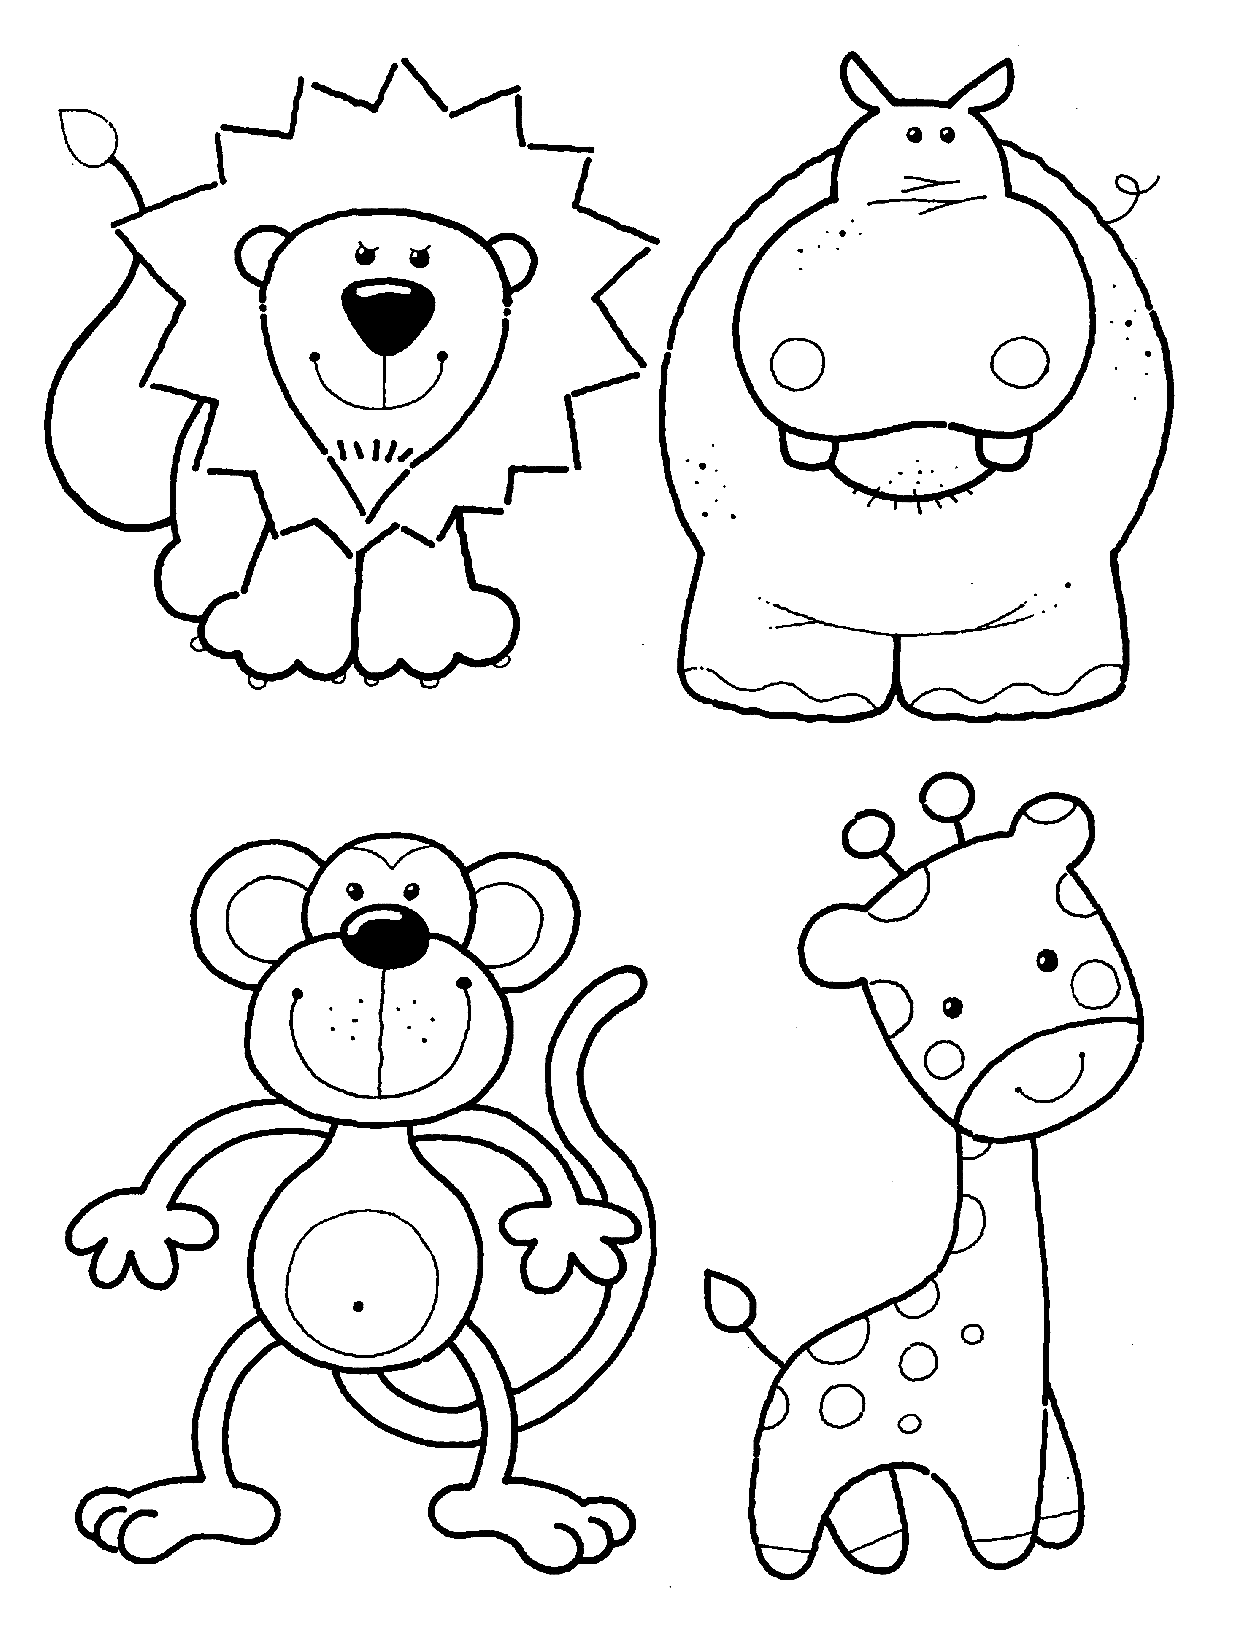 Cute Zoo Animals Coloring Pages   Zoo Coloring Pages   Coloring ...